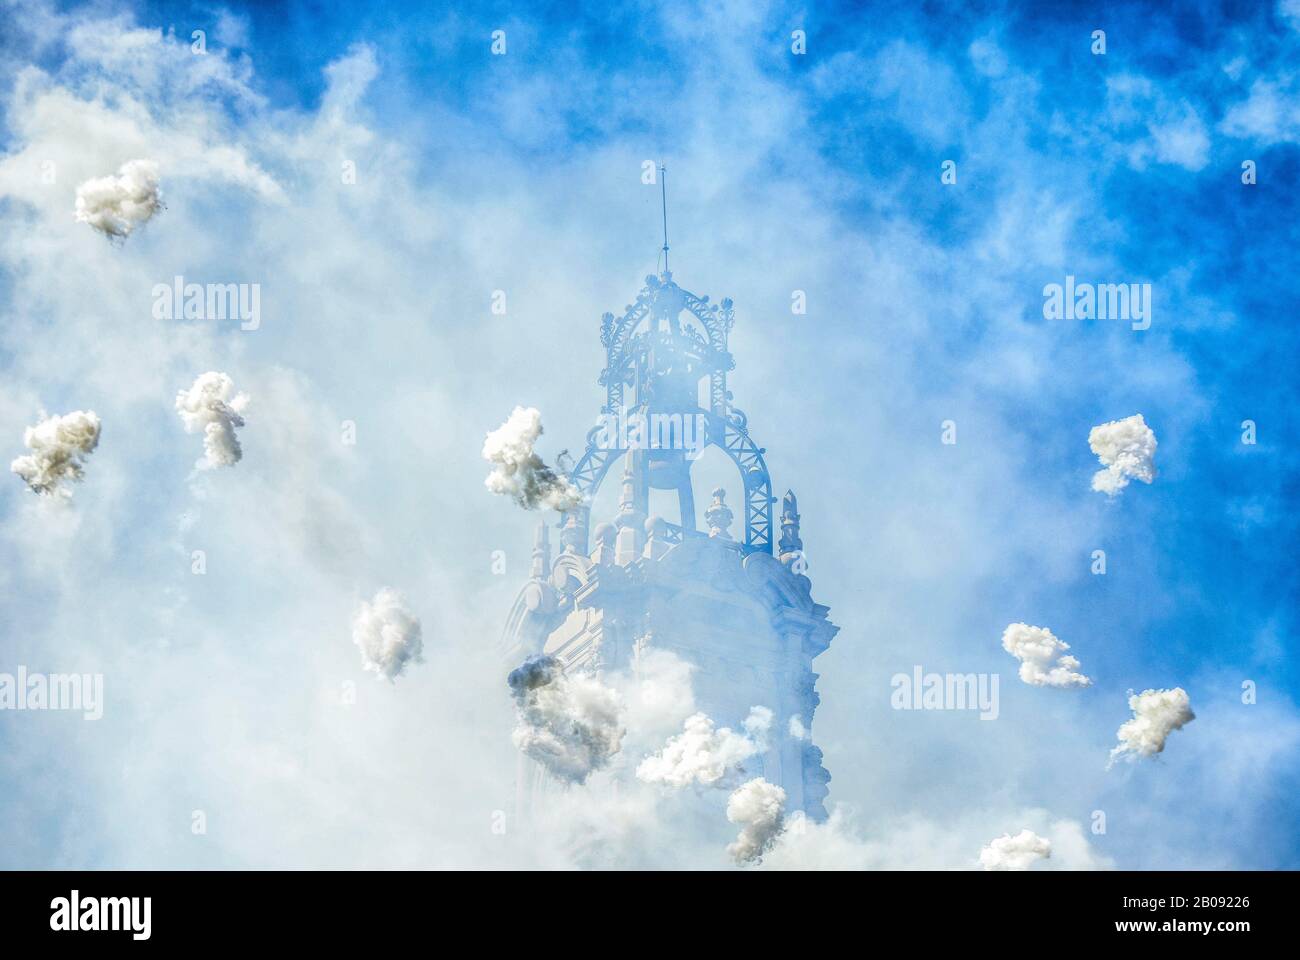 Mascleta firecrackers and the Town Hall of Valencia during the Fallas Festival in Spain. Stock Photo